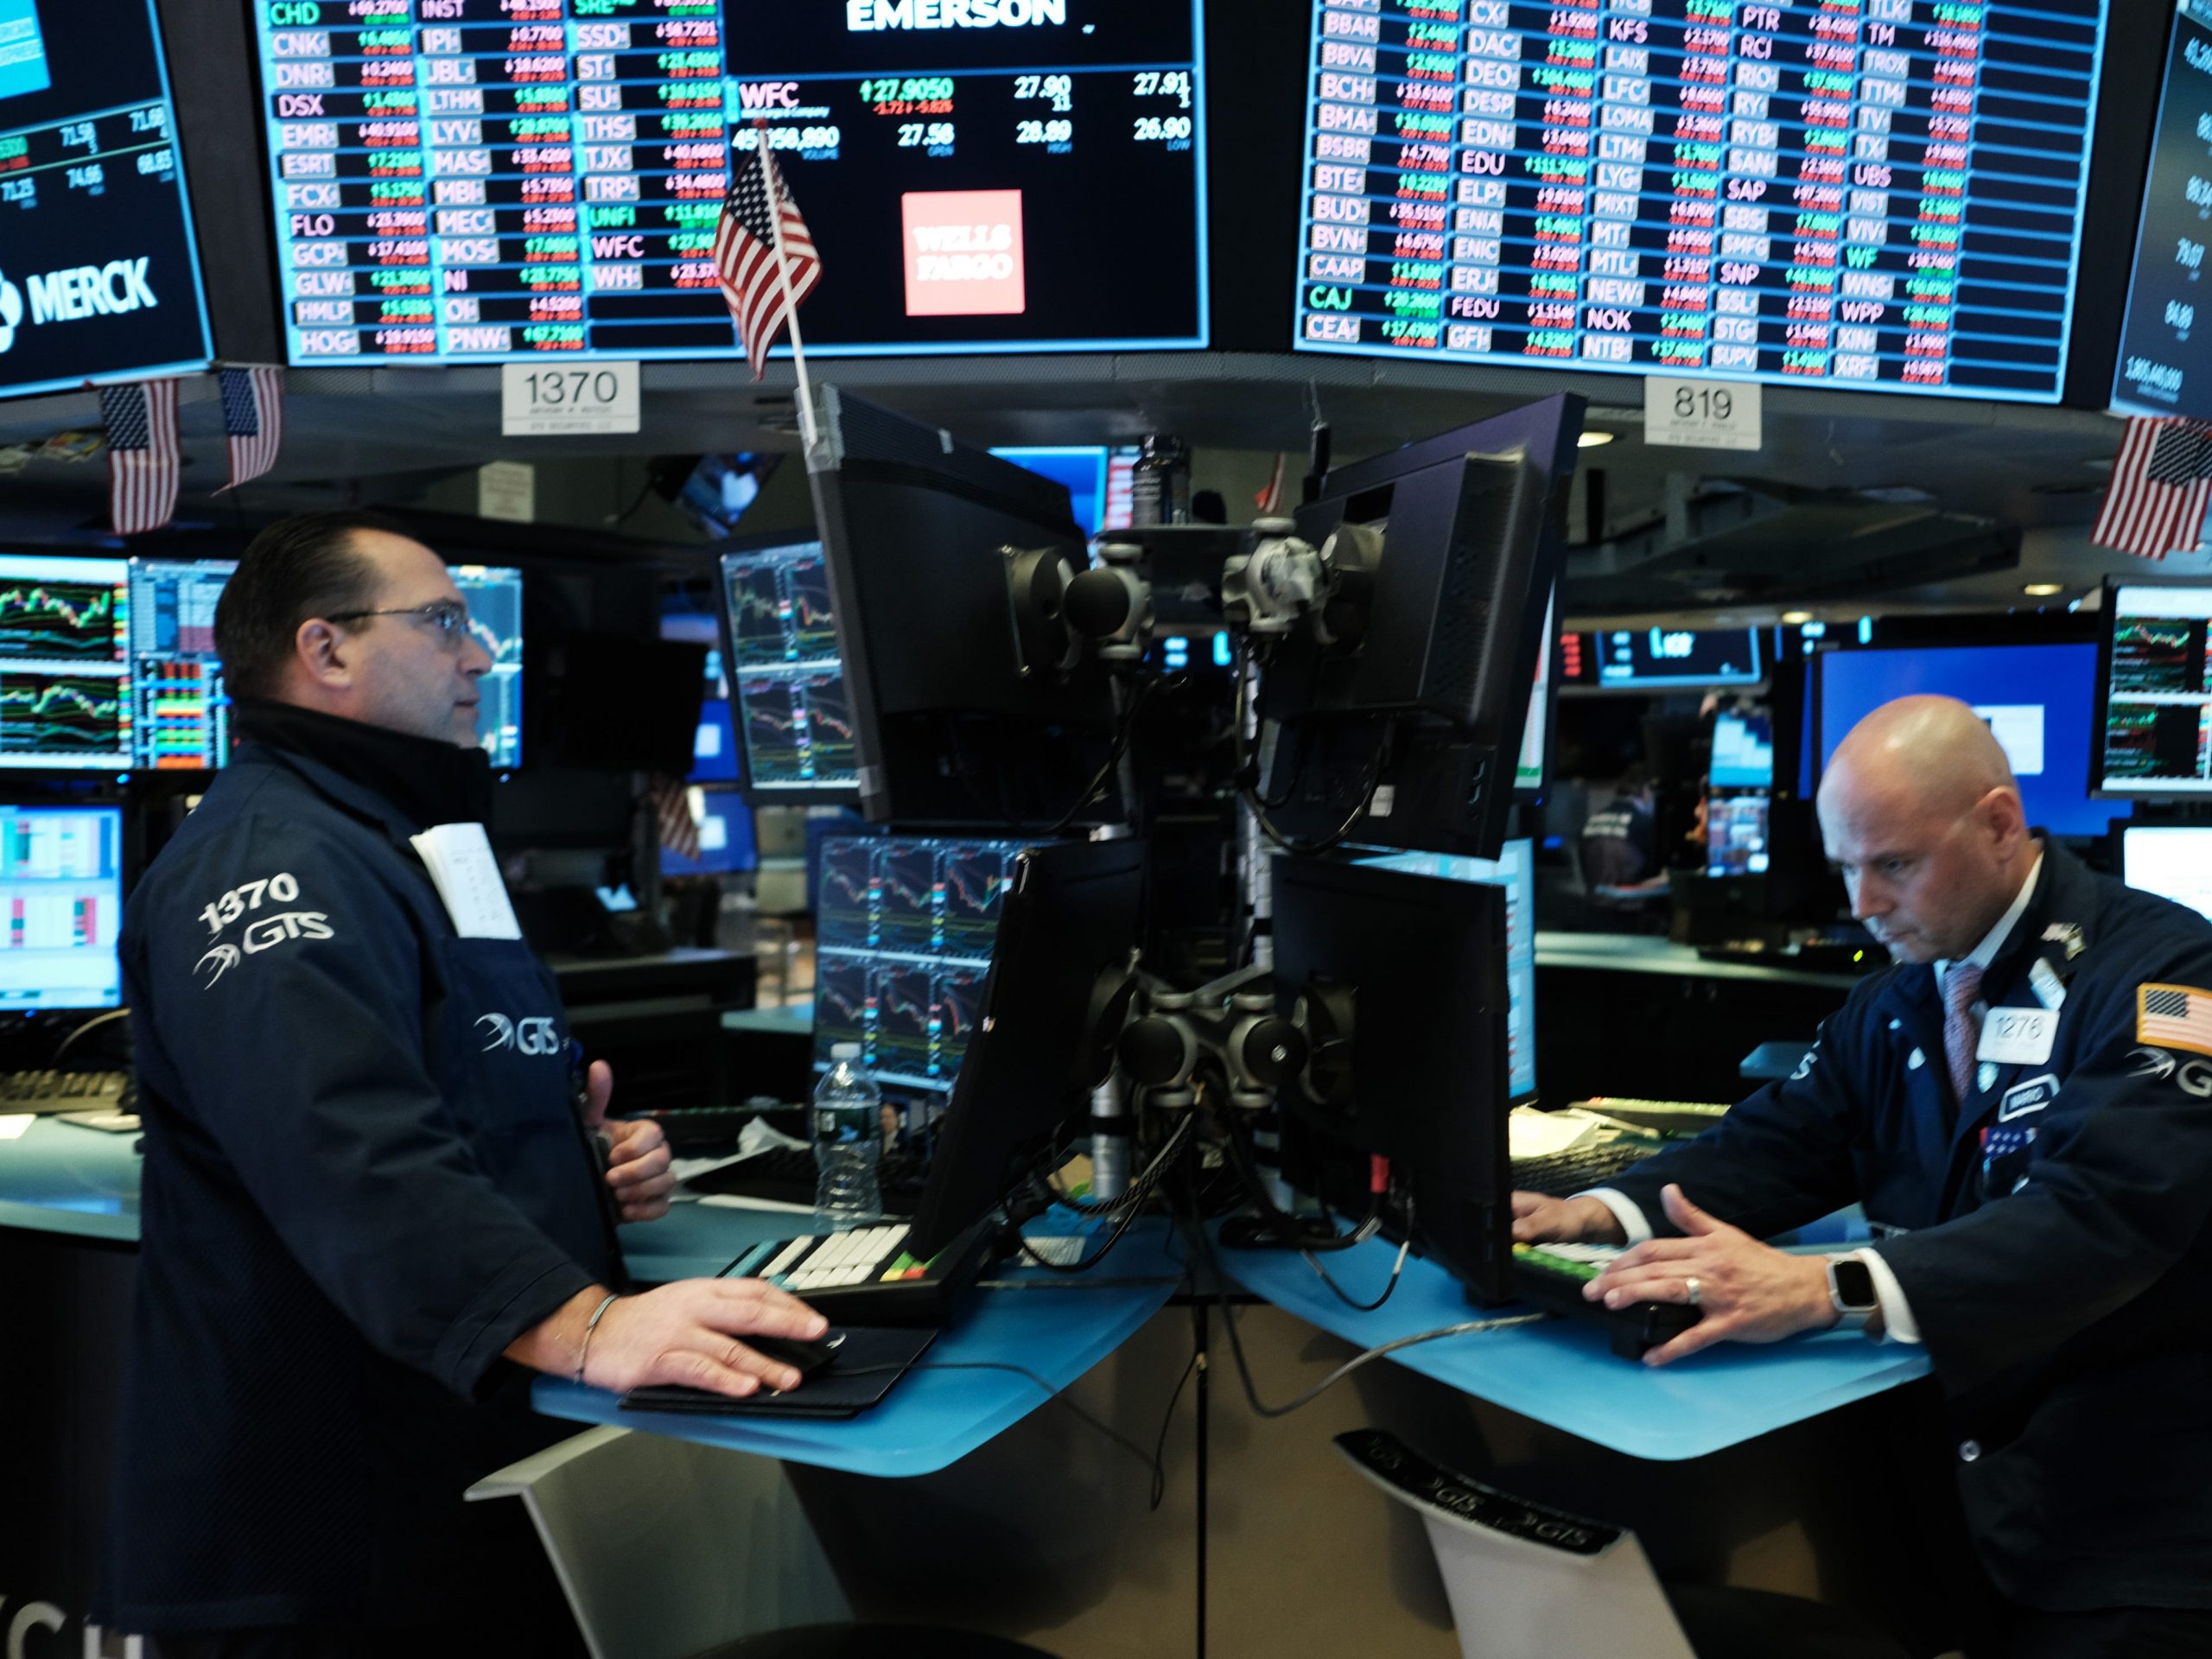 Traders work on the floor of the New York Stock Exchange (NYSE) on March 18, 2020 in New York City. The Dow fell more than 1,200 points today as COVID-19 fears continue to roil world markets. (